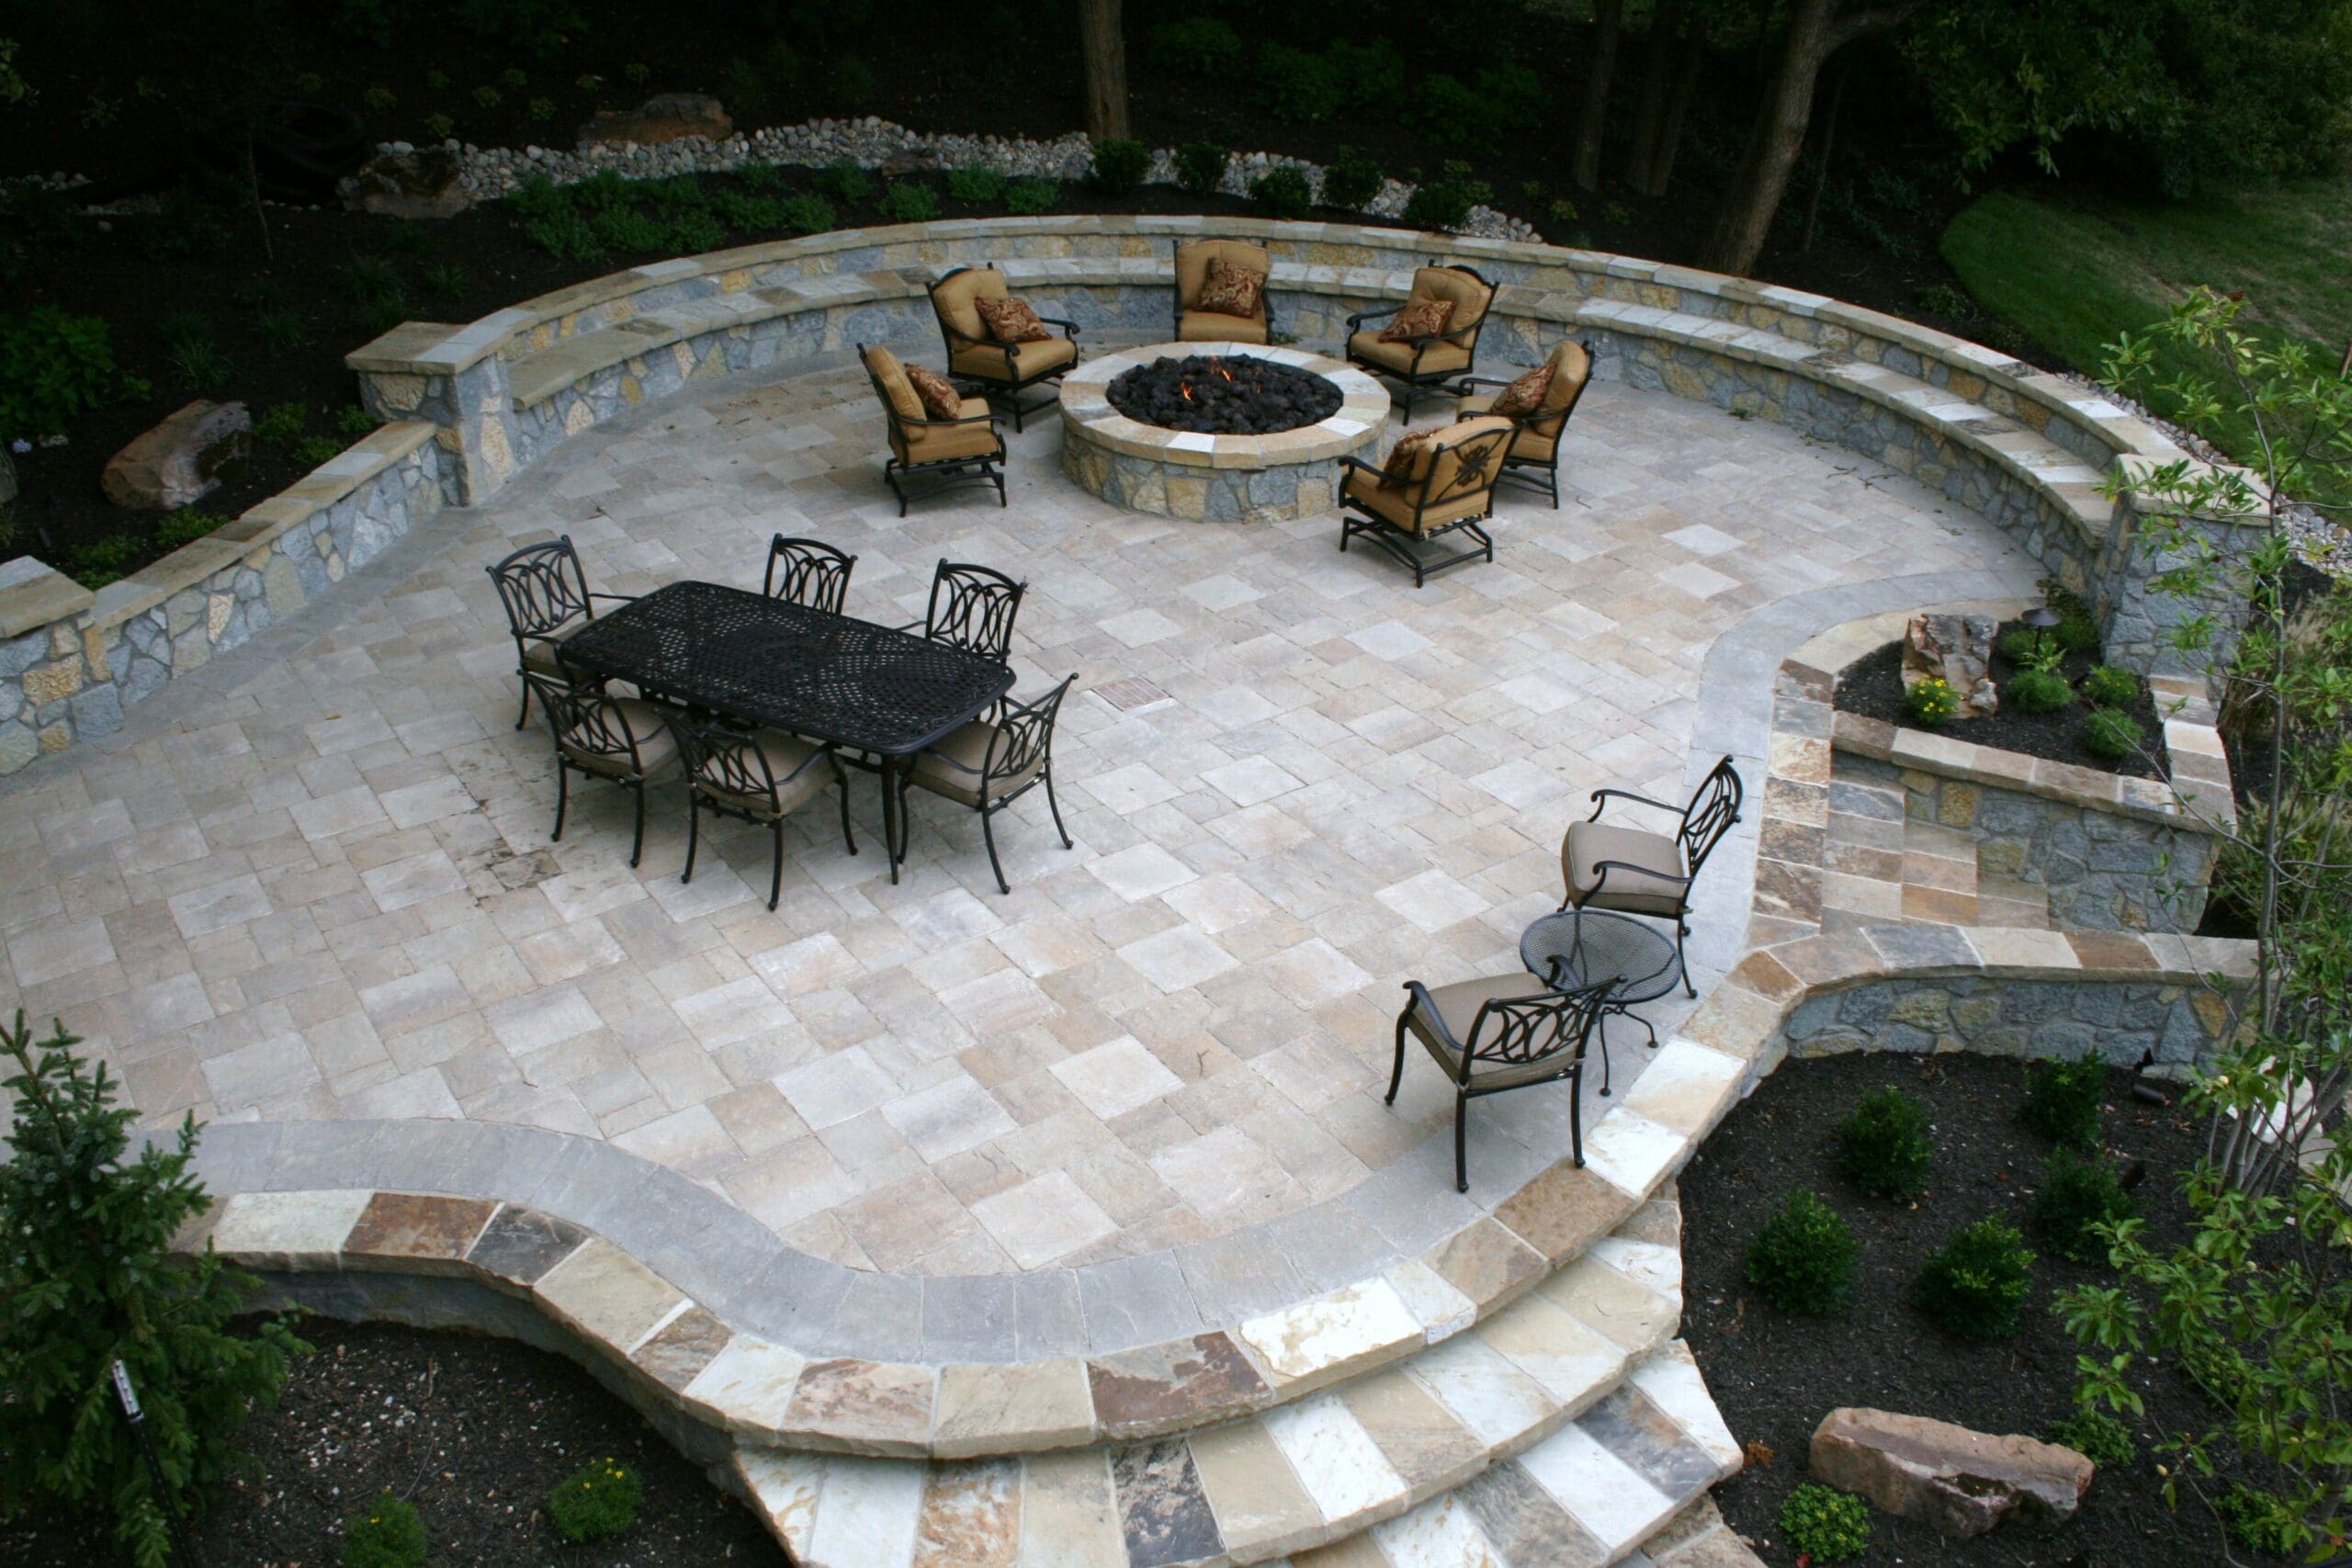 Firepit and multiple chairs and tables